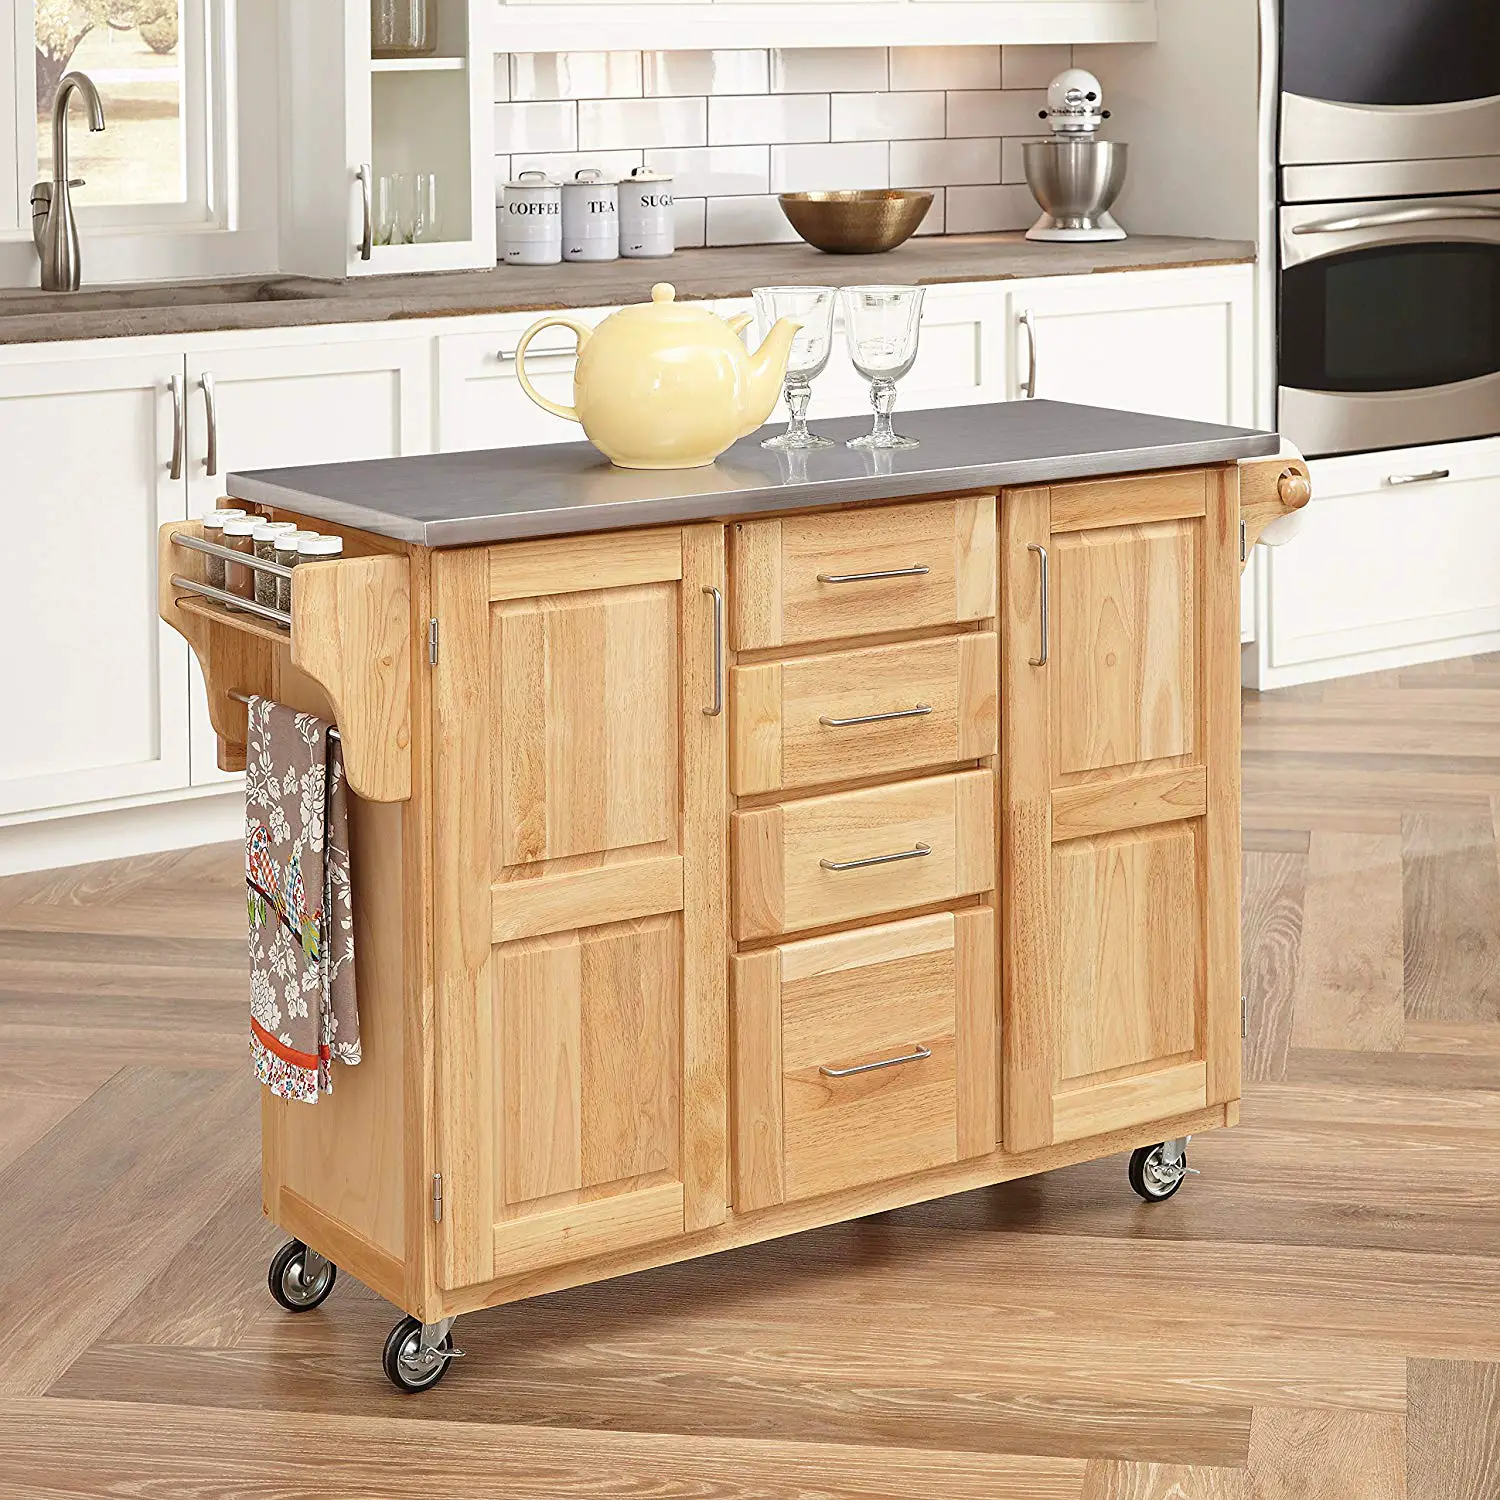 Kitchen Cart with Breakfast bar & Stainless Steel Top by Home Styles.